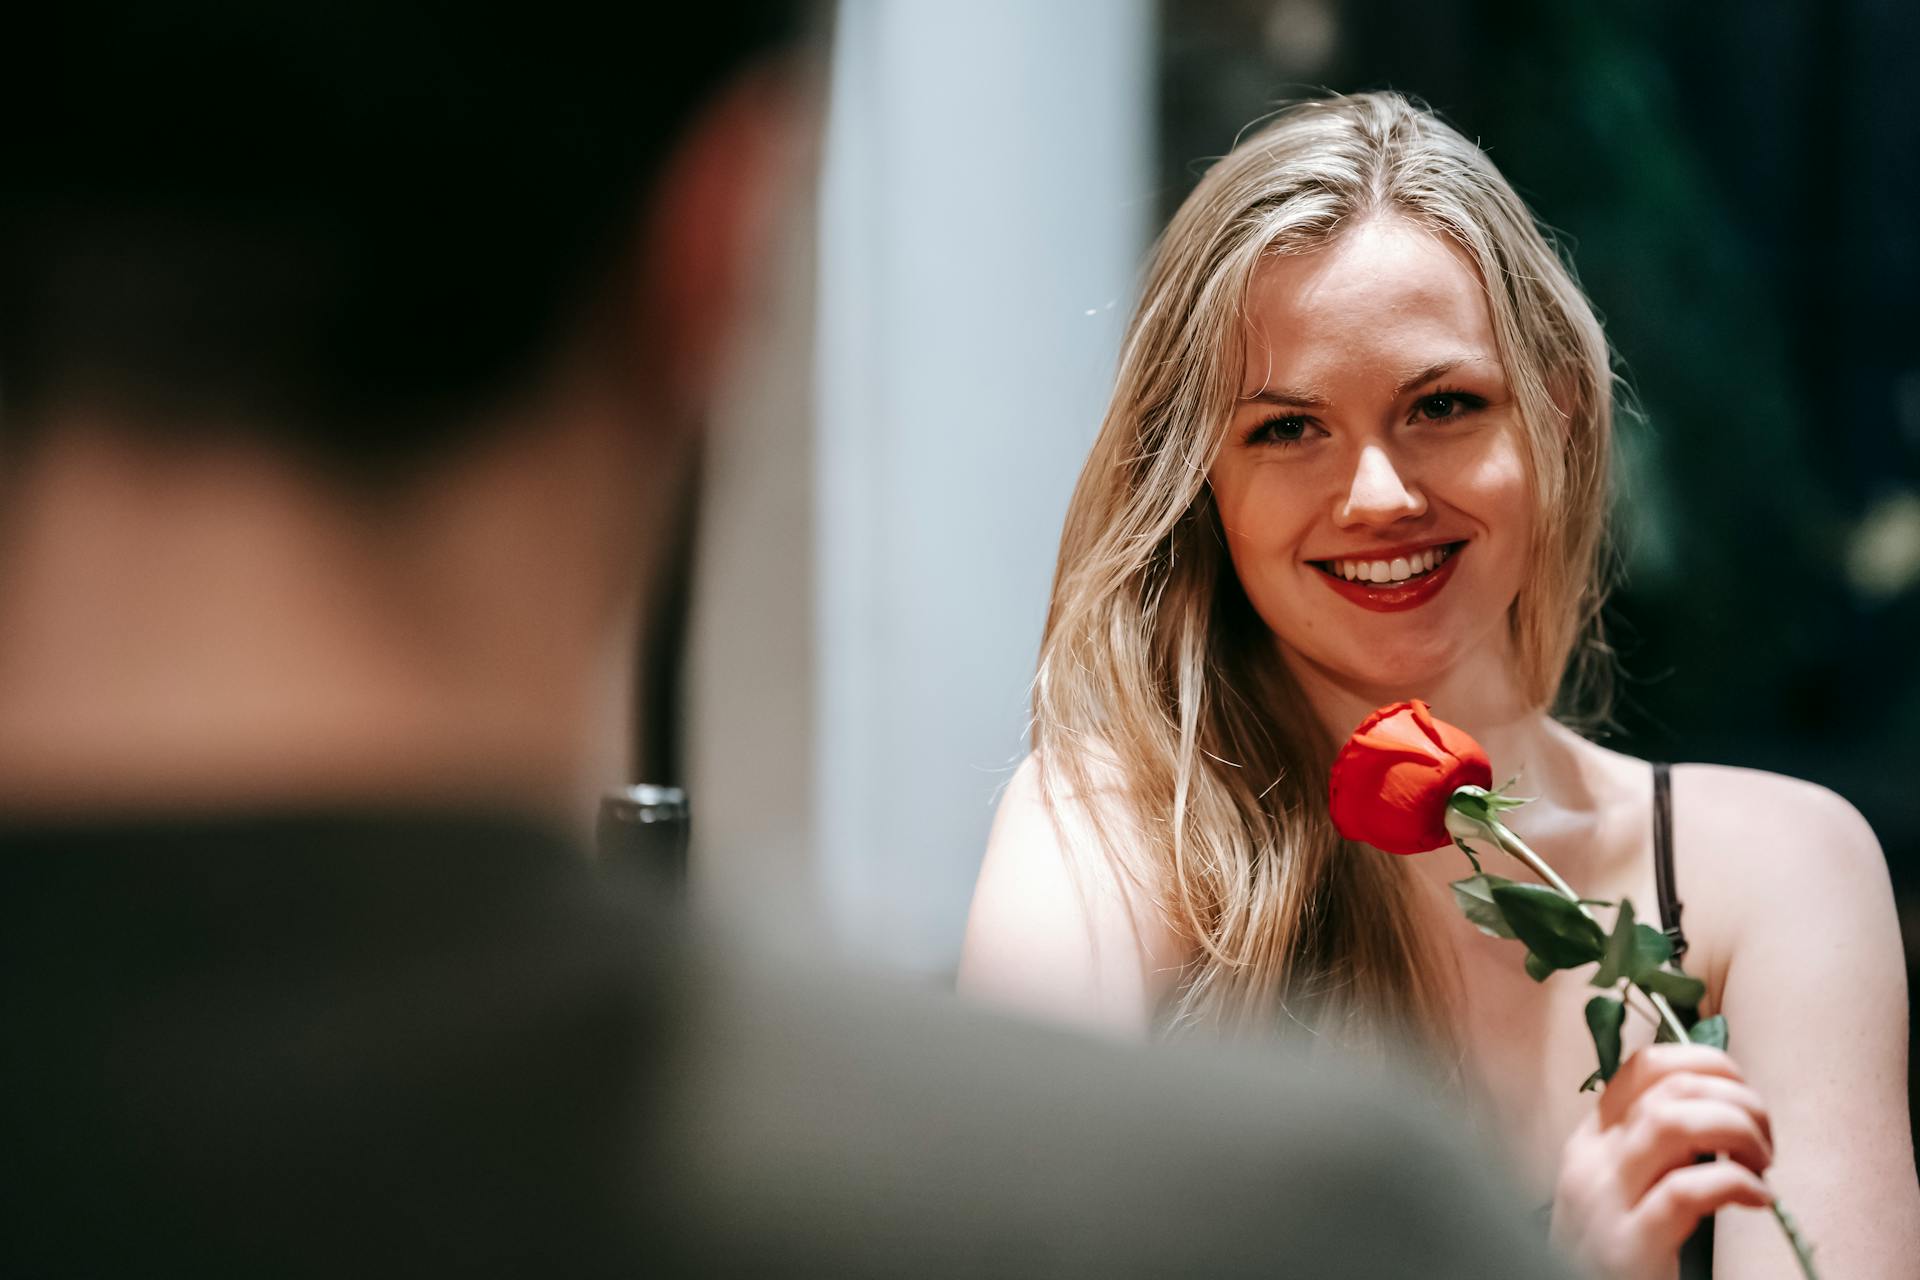 A woman smiling at her boyfriend | Source: Pexels